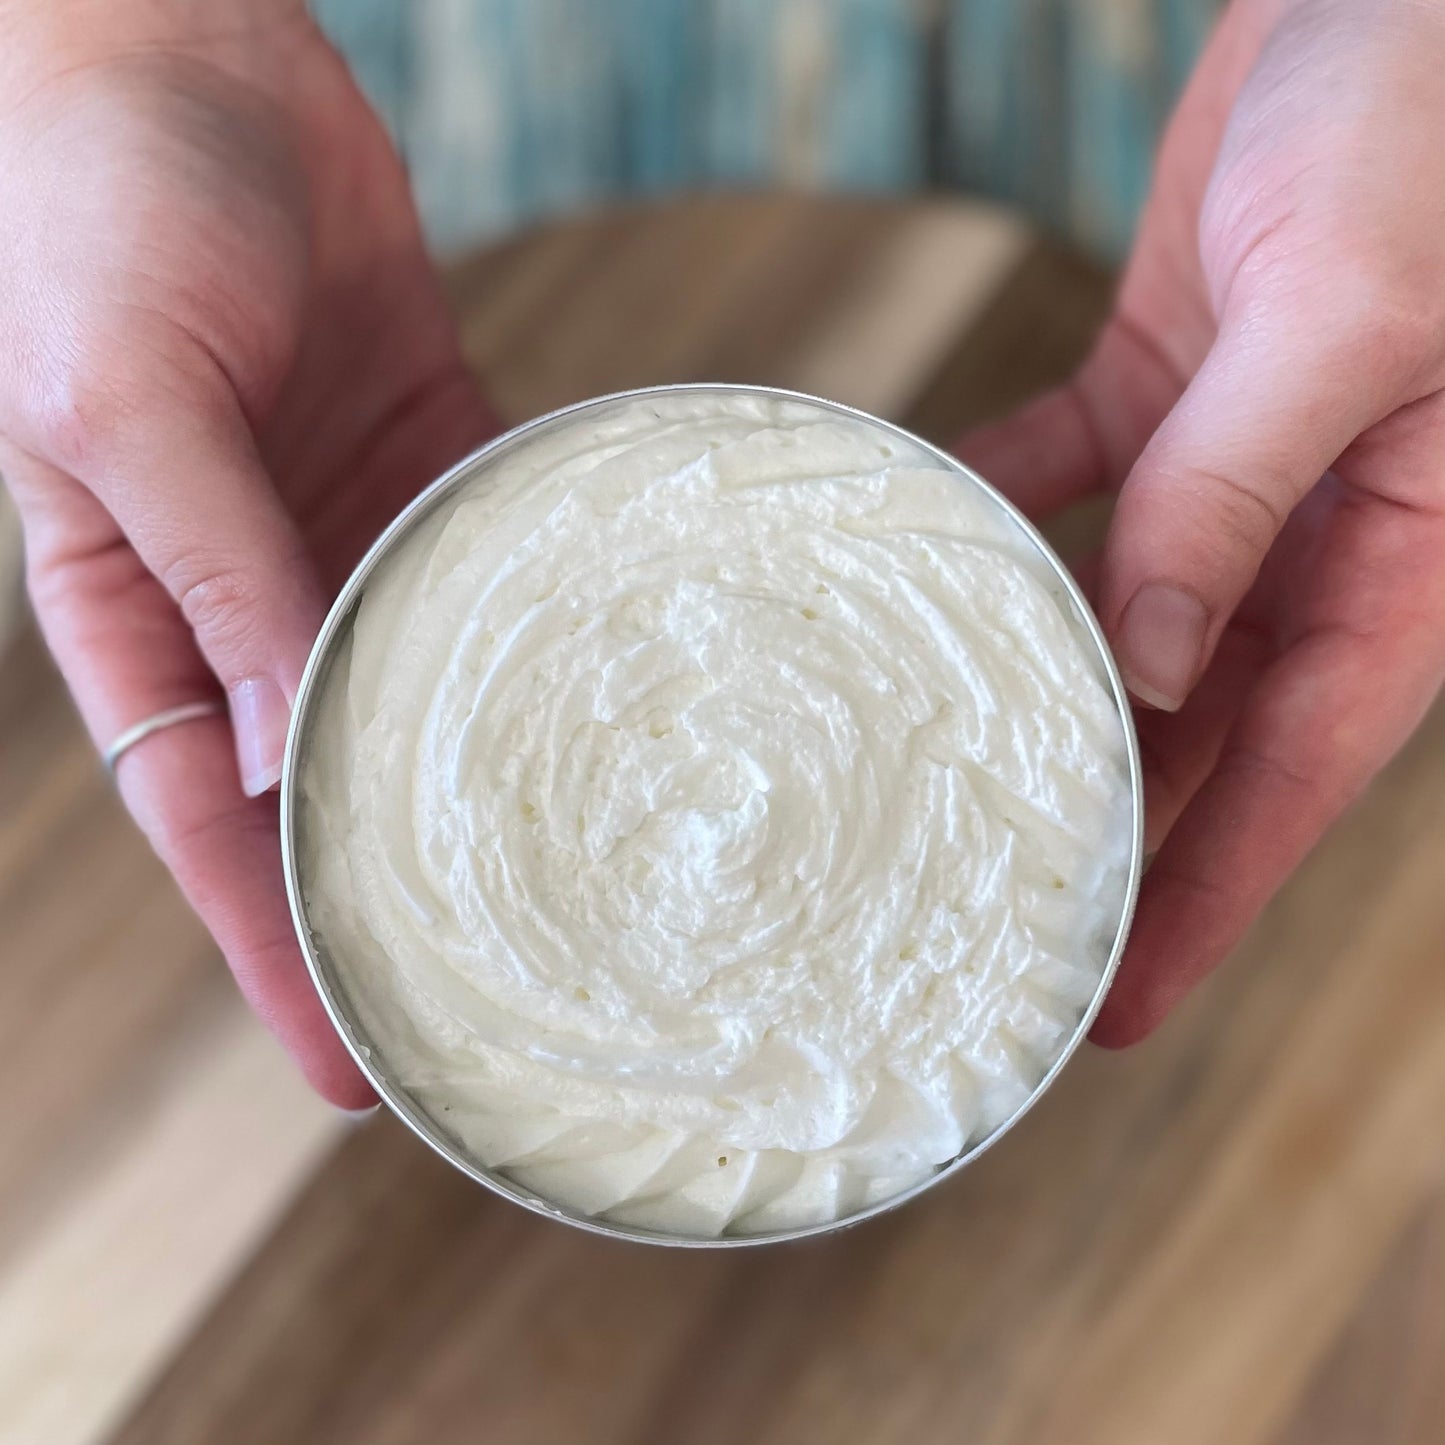 Cedarwood & Fir Whipped Tallow Skin Cream | All Natural Moisturizer and Body Butter | Made with Local Ingredients | Aluminum Container